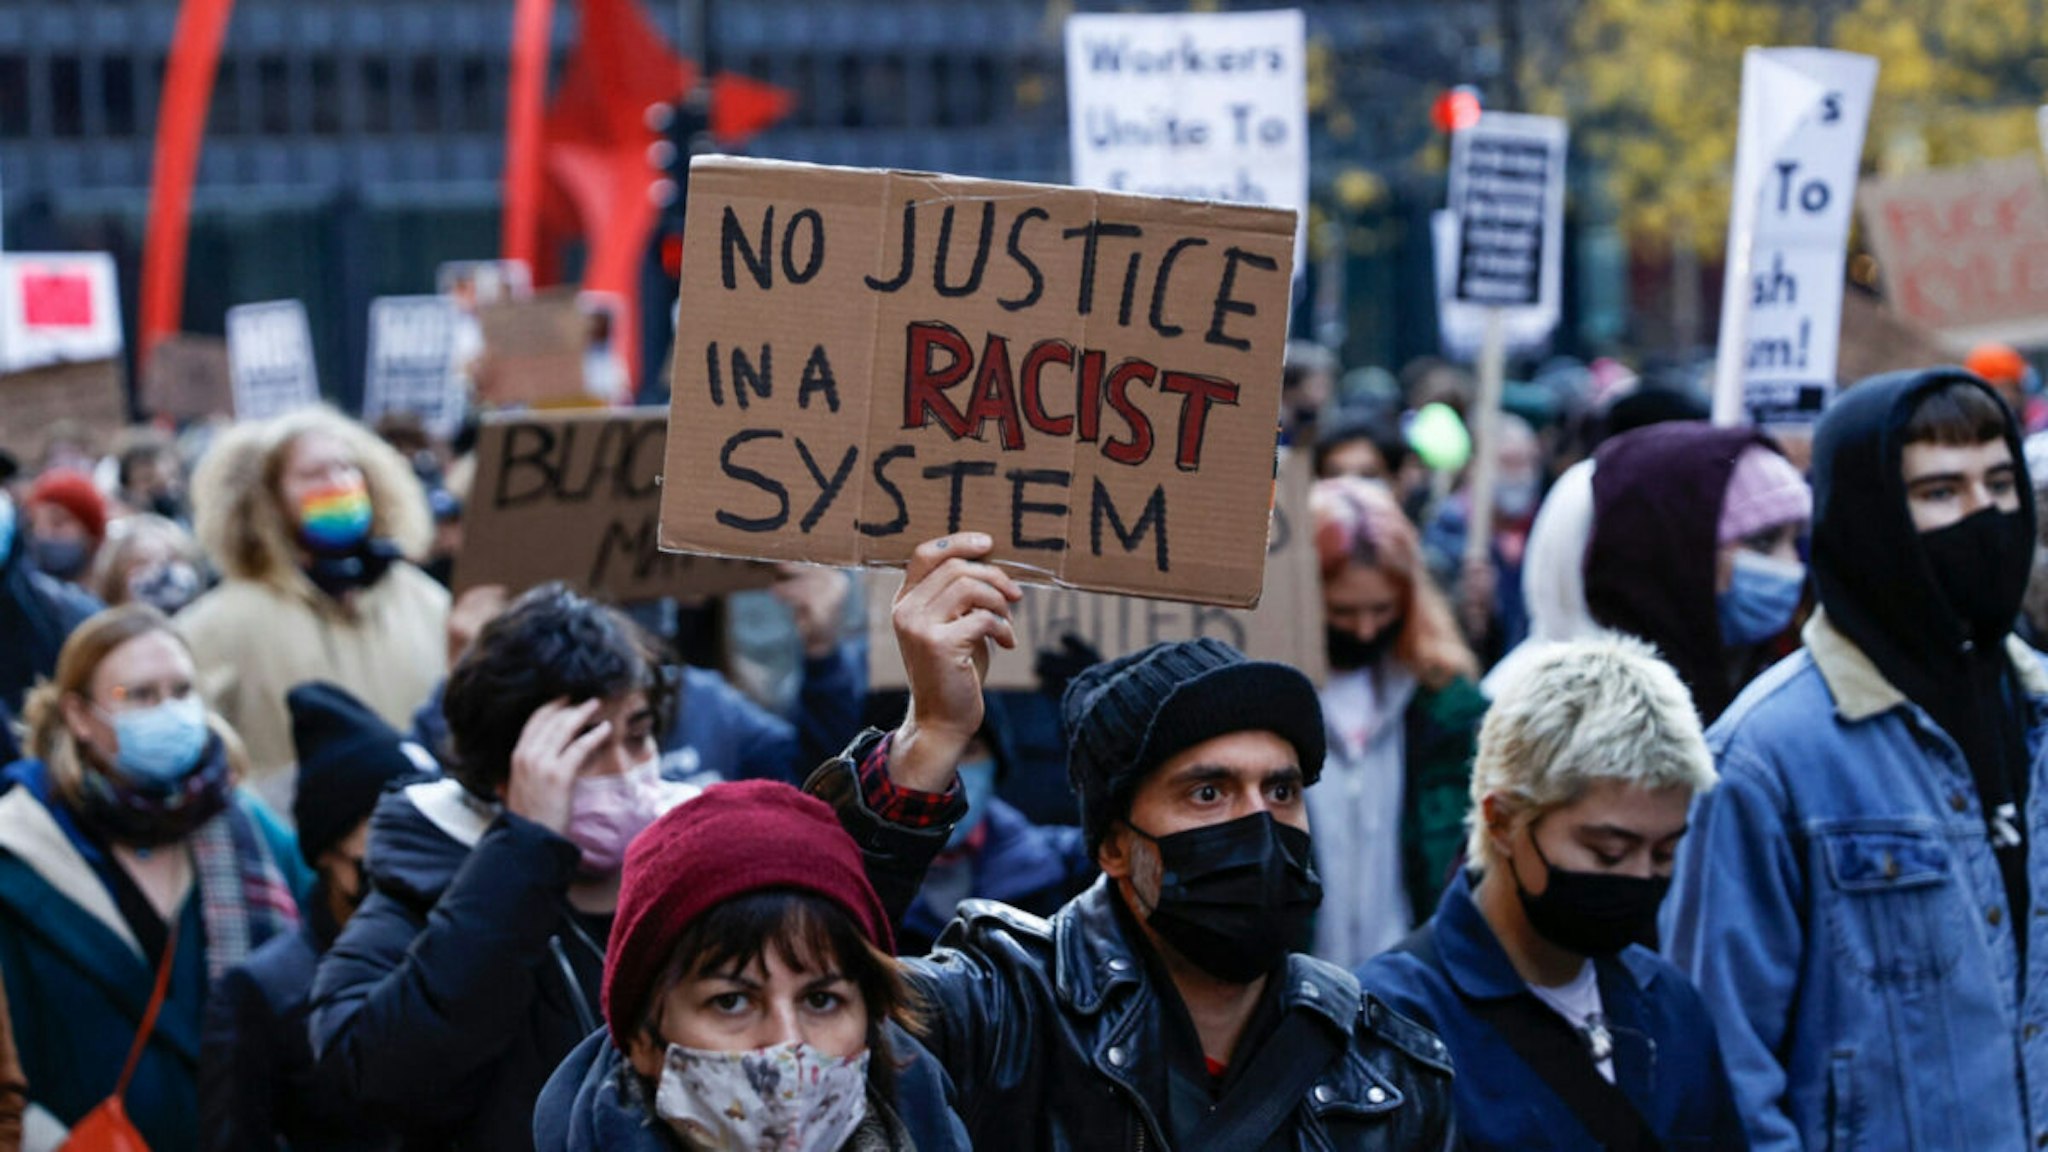 Demonstrators hold signs as they march during a protest against the not guilty verdit for Kyle Rittenhouse on Novermber 20, 2021 in Chicago, Illinois.